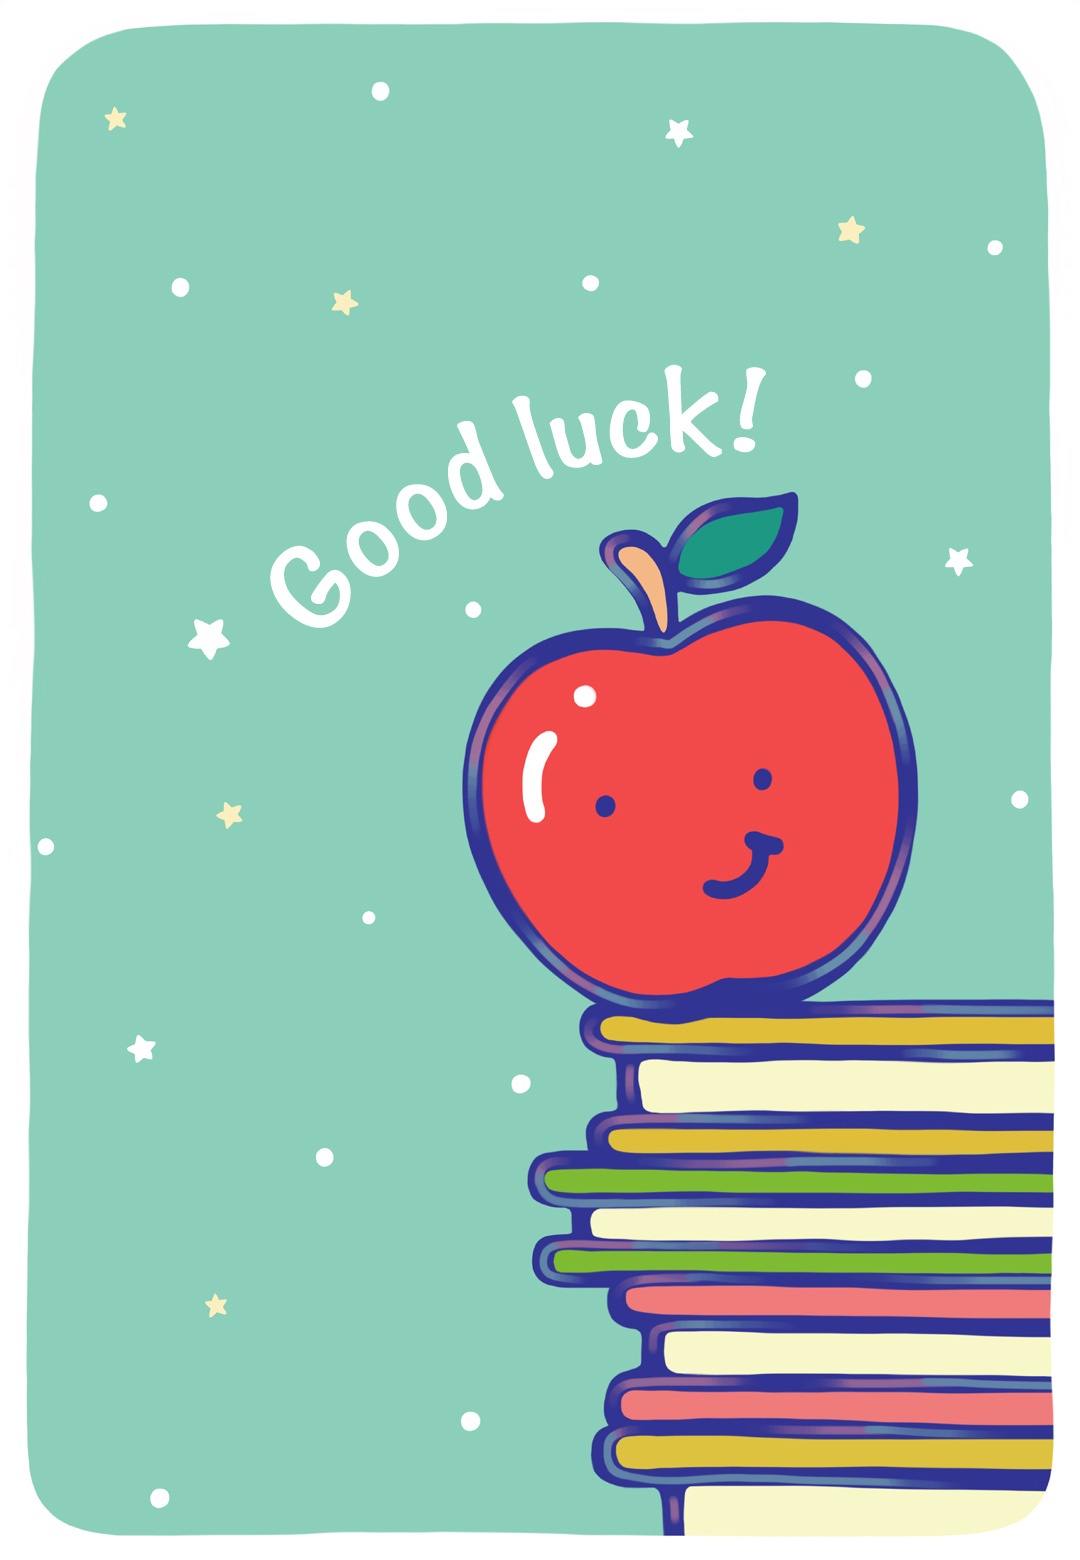 May Hard Work Pay Off - Good Luck Card (Free) | Greetings Island - Free Printable Good Luck Cards